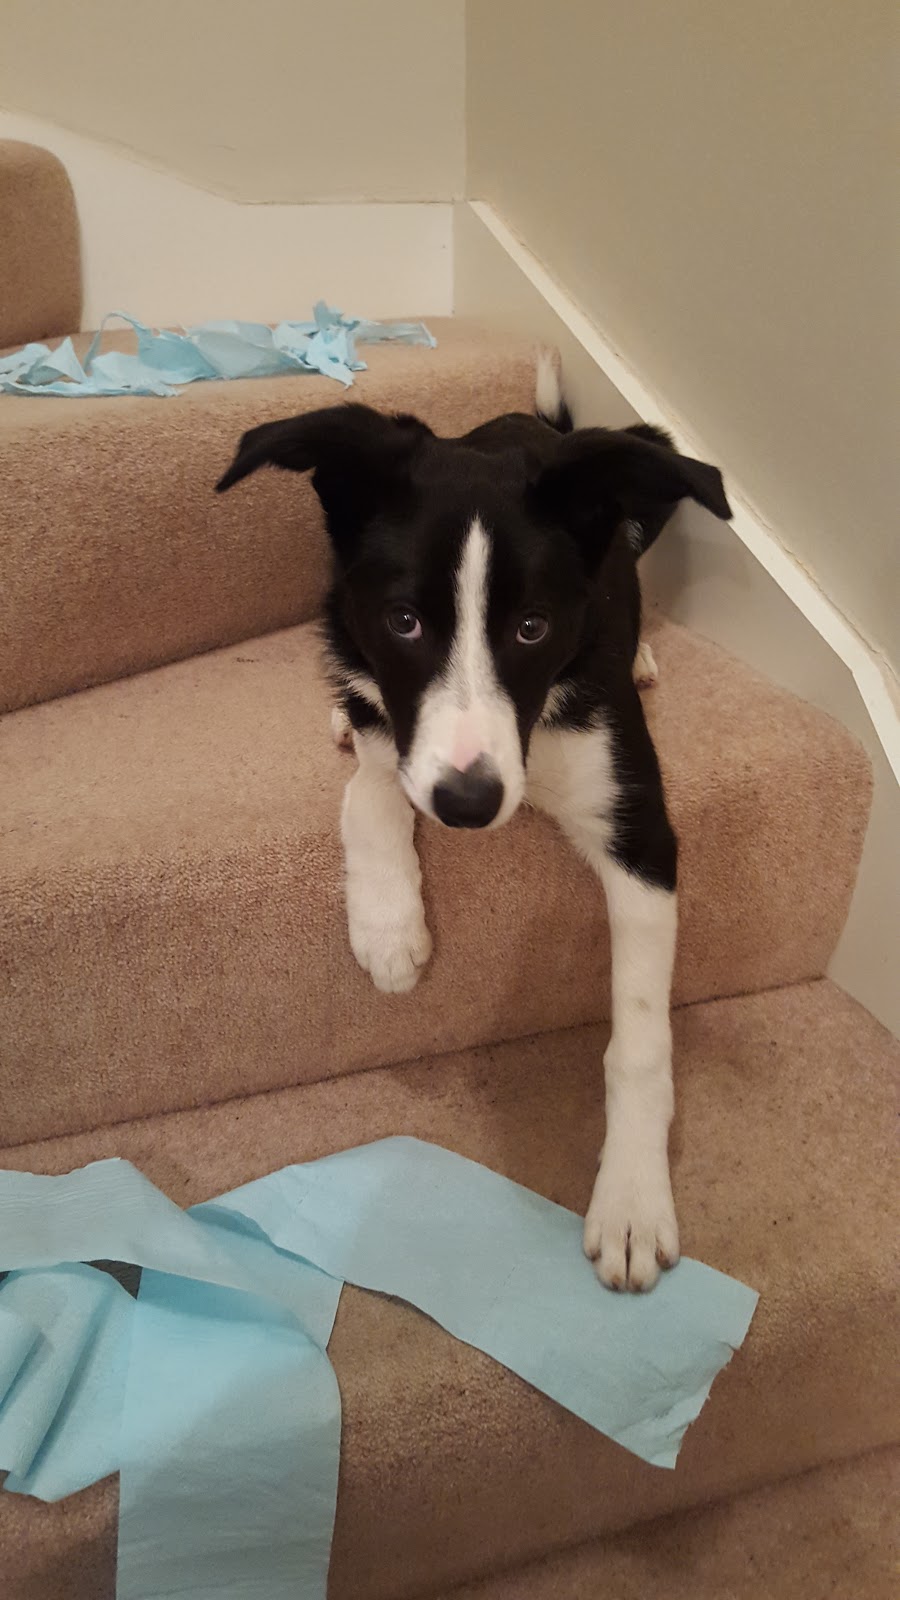 How About A Border Collie For The Next Andrex Puppy!?!